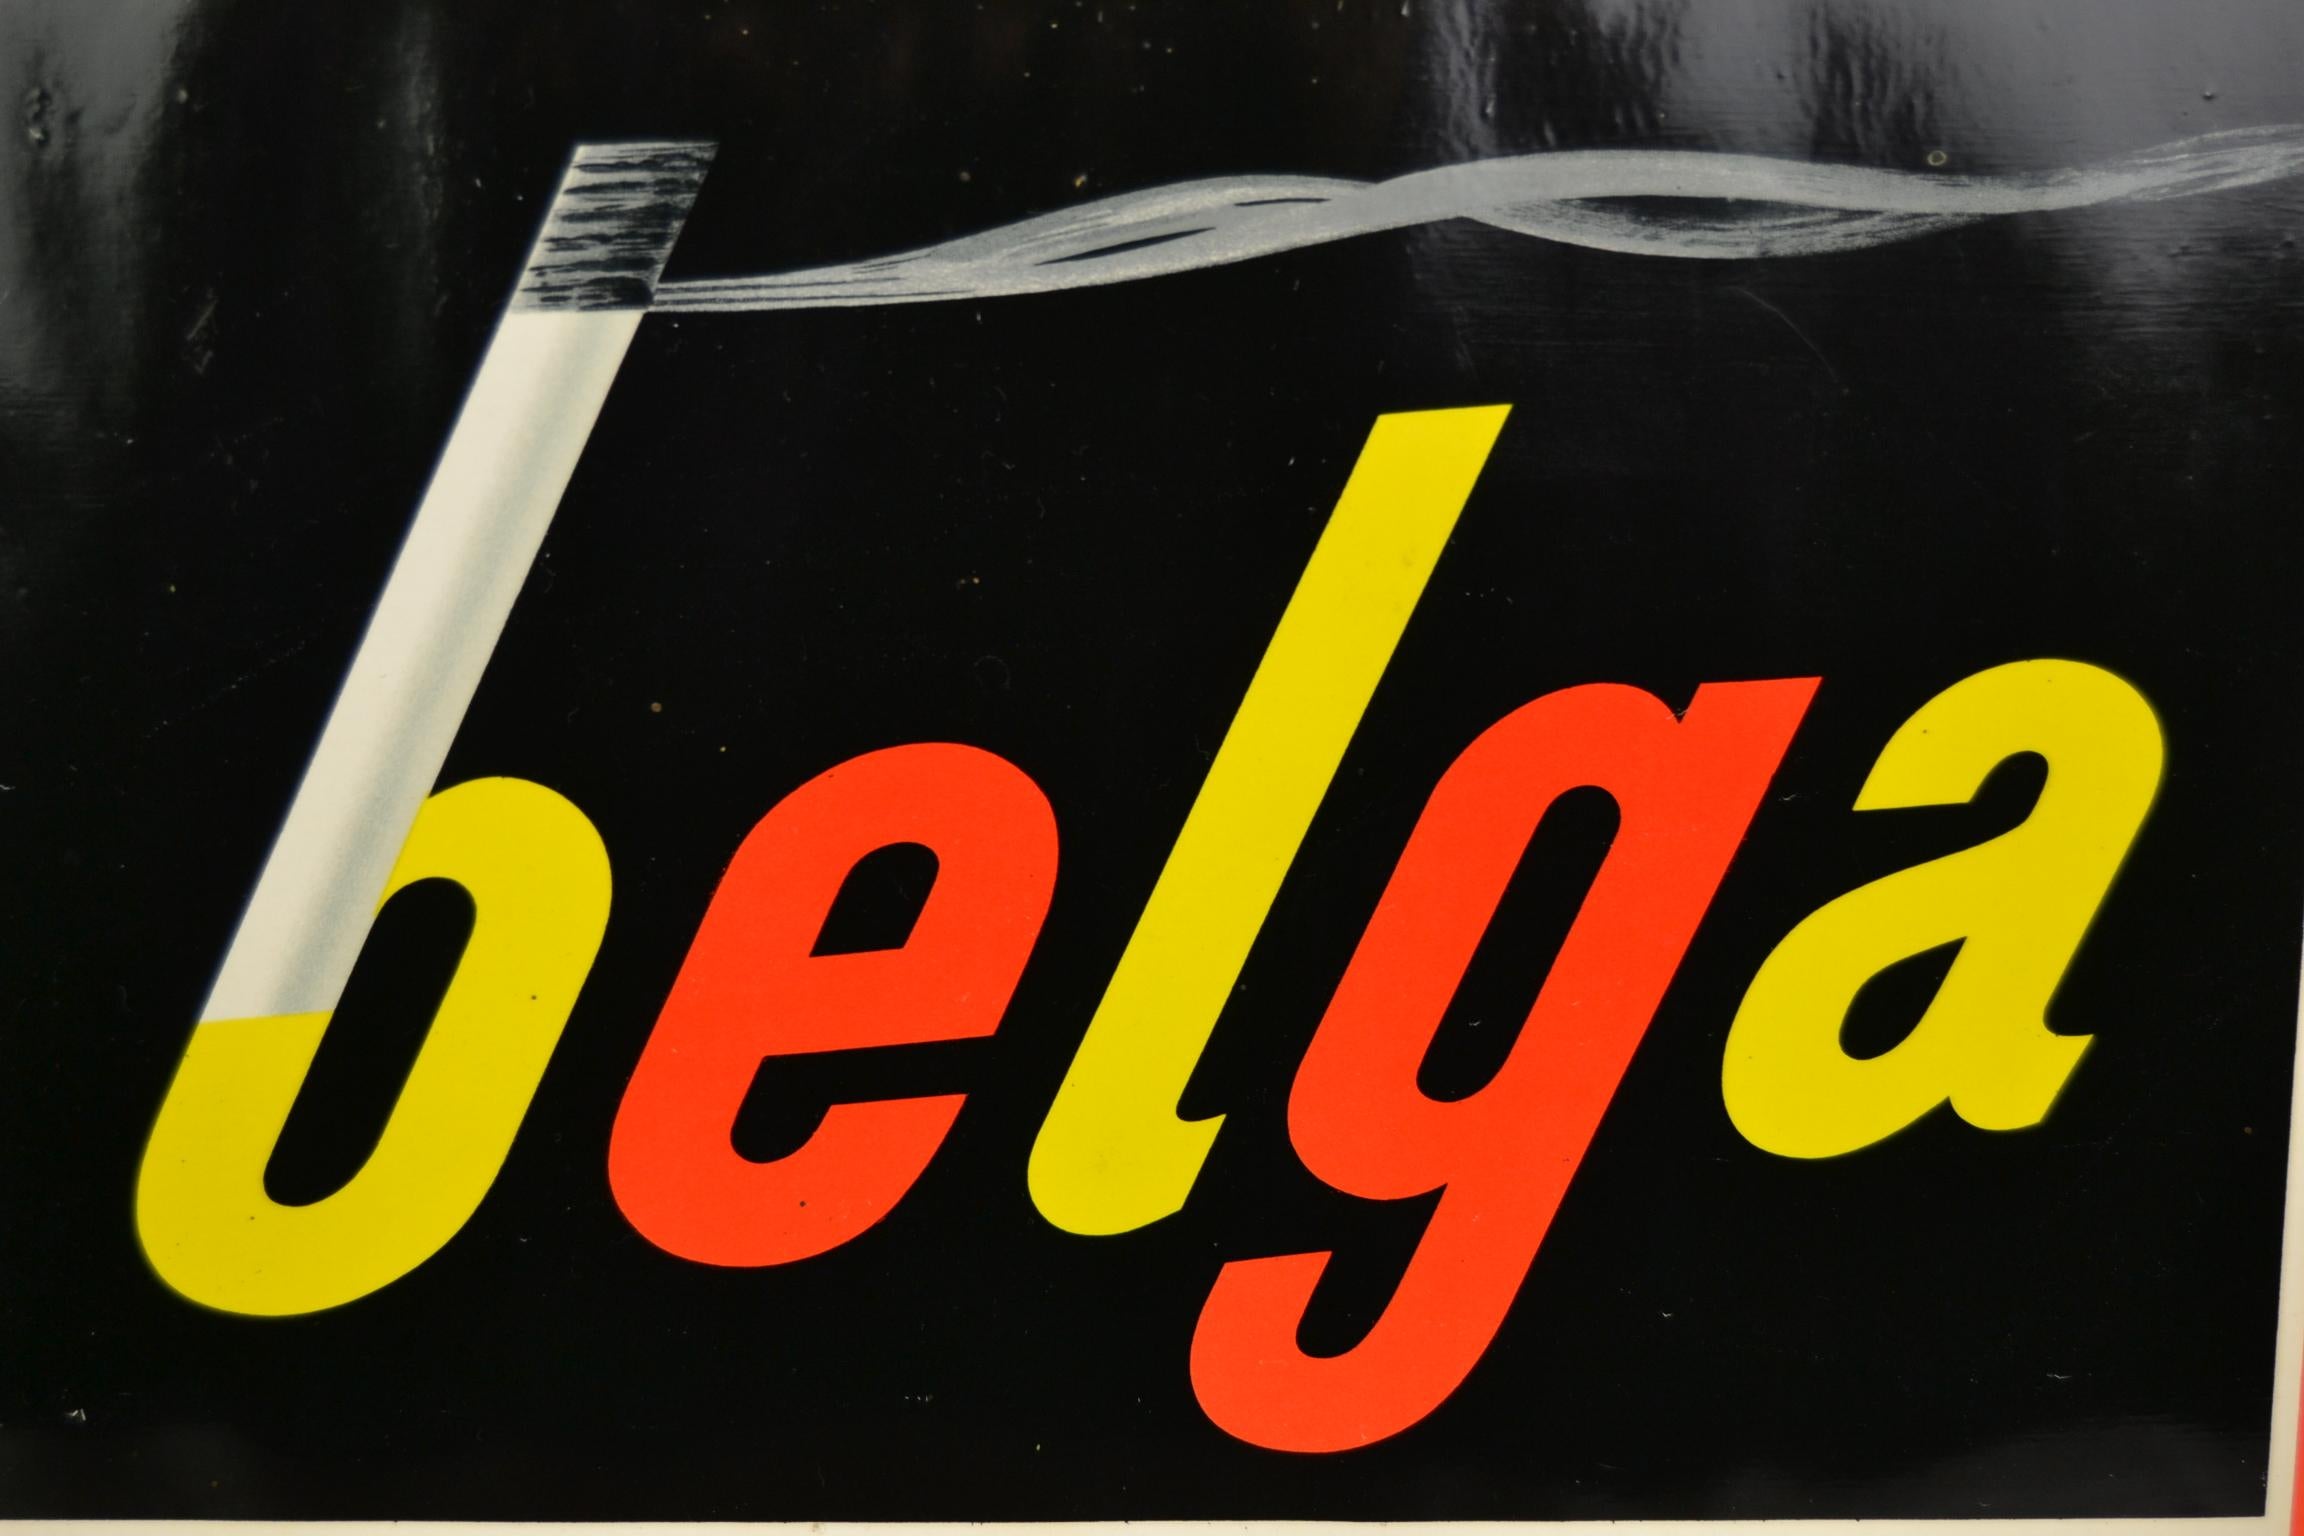 Vintage advertising sign for Belga Cigarettes.
This publicity sign has the Belgium colors black, red and yellow. Made by rob otten brussels. It's a tin framed cellulite sign. Wall decoration - wall sign for Belga cigarettes smoker.